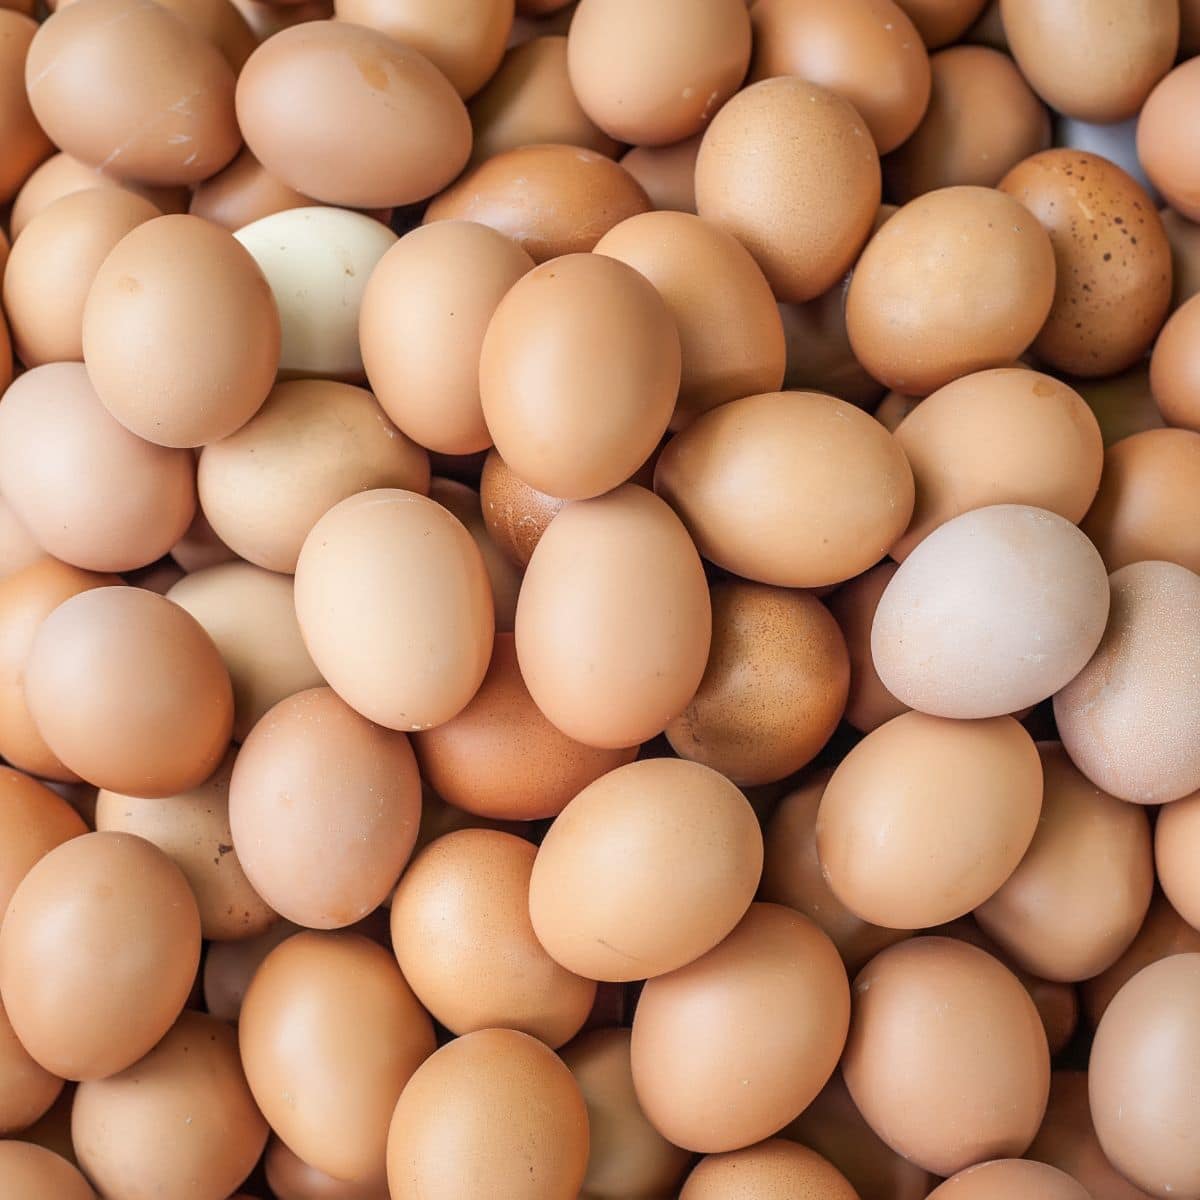 Square image of eggs.